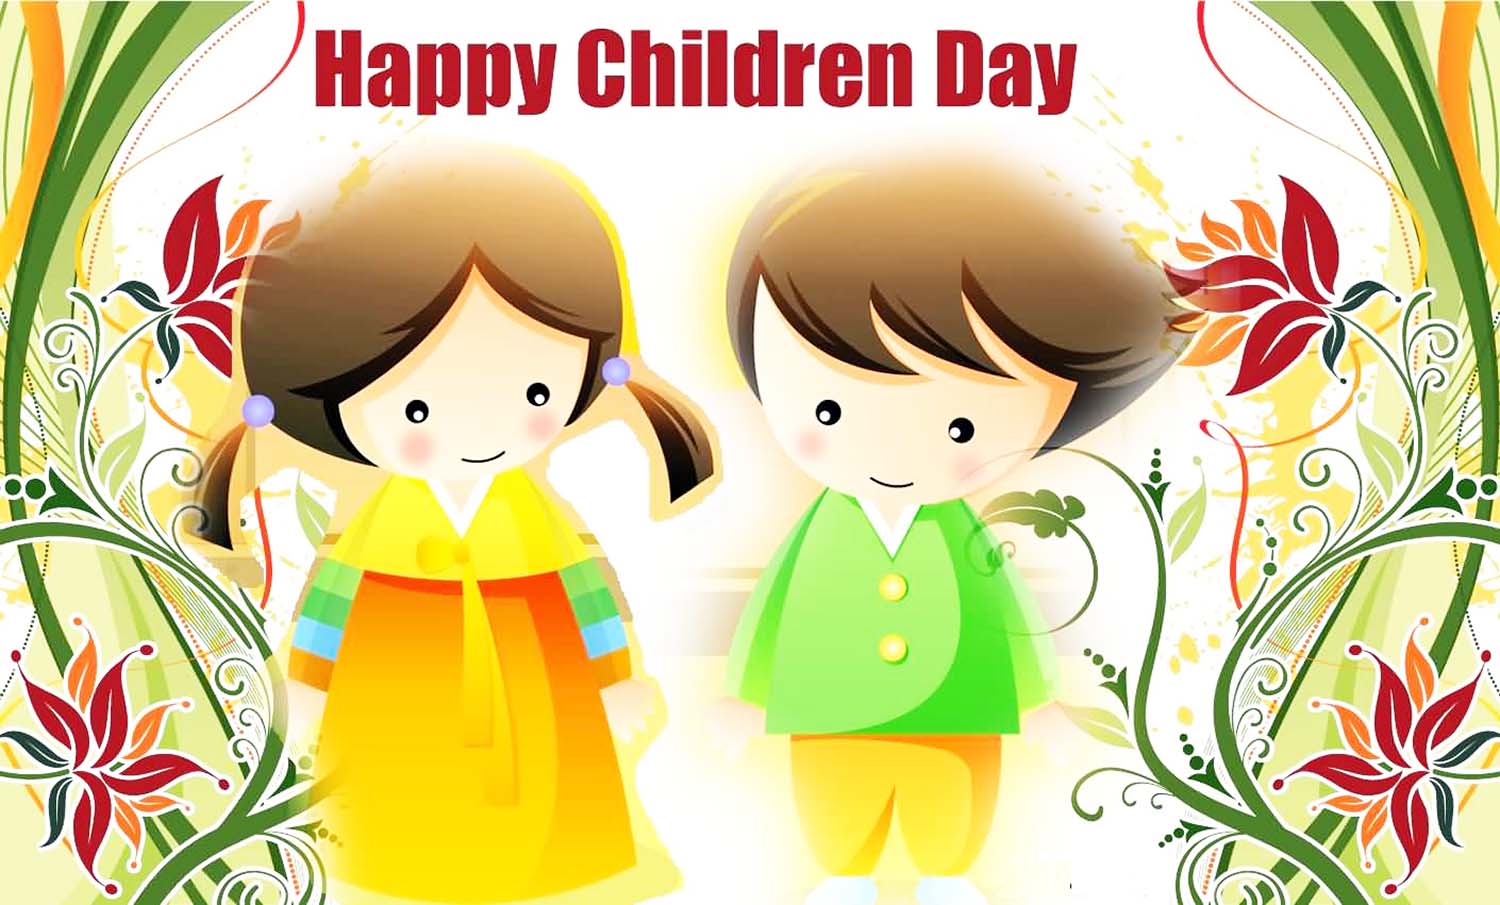 happy children's day images hd 